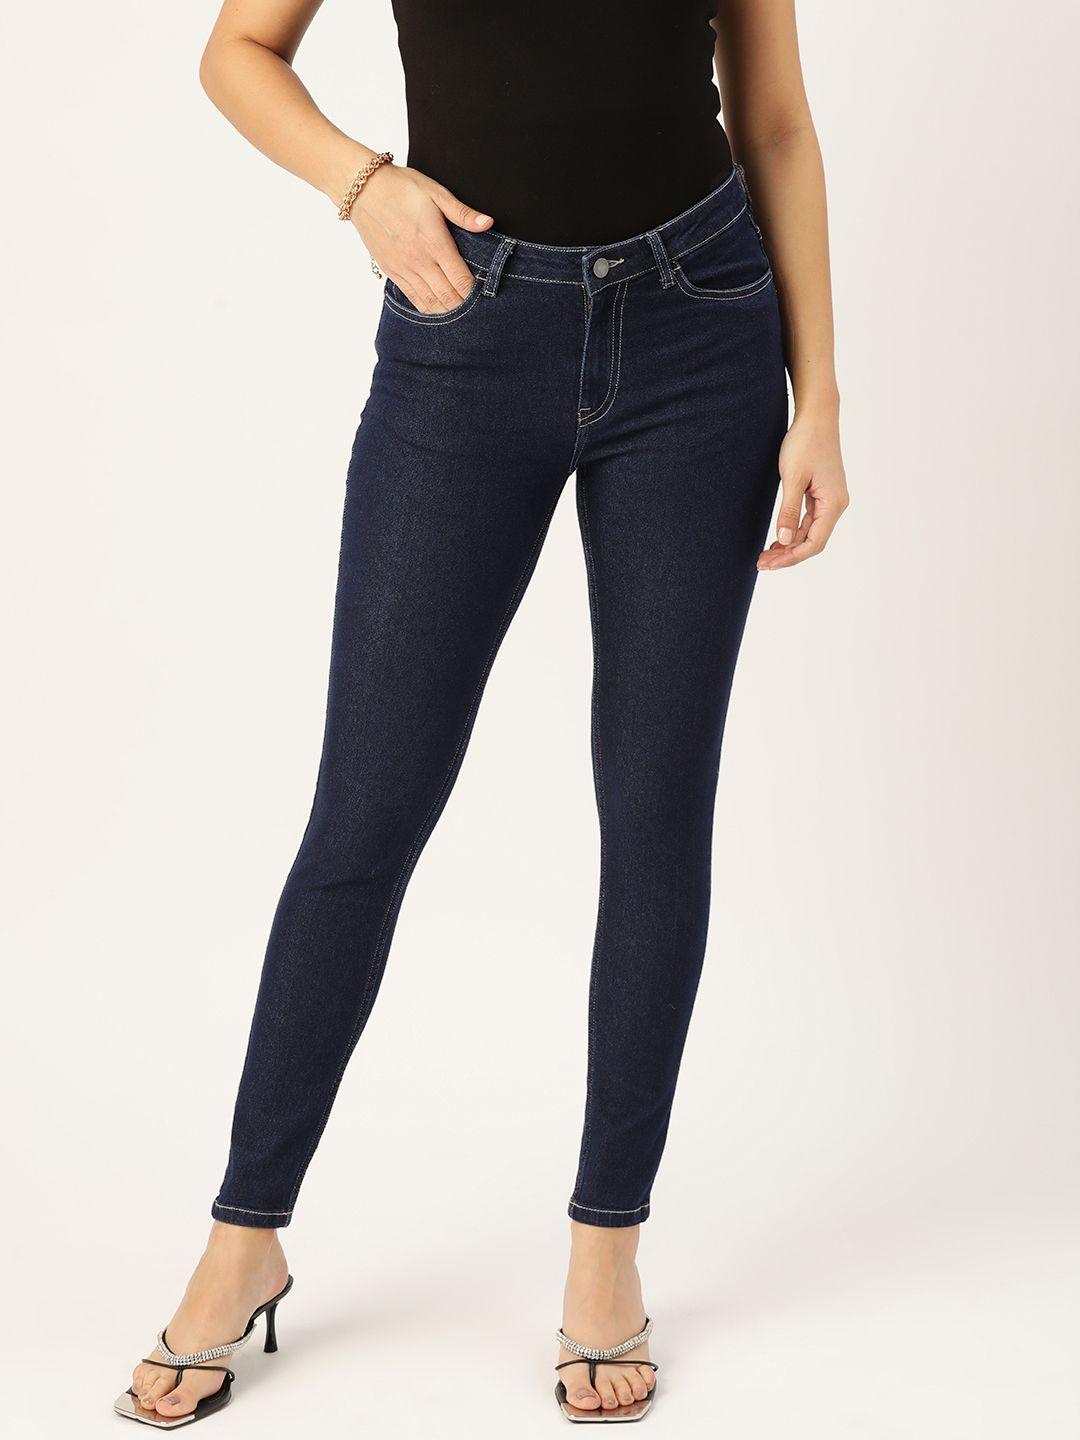 dressberry women skinny fit stretchable jeans